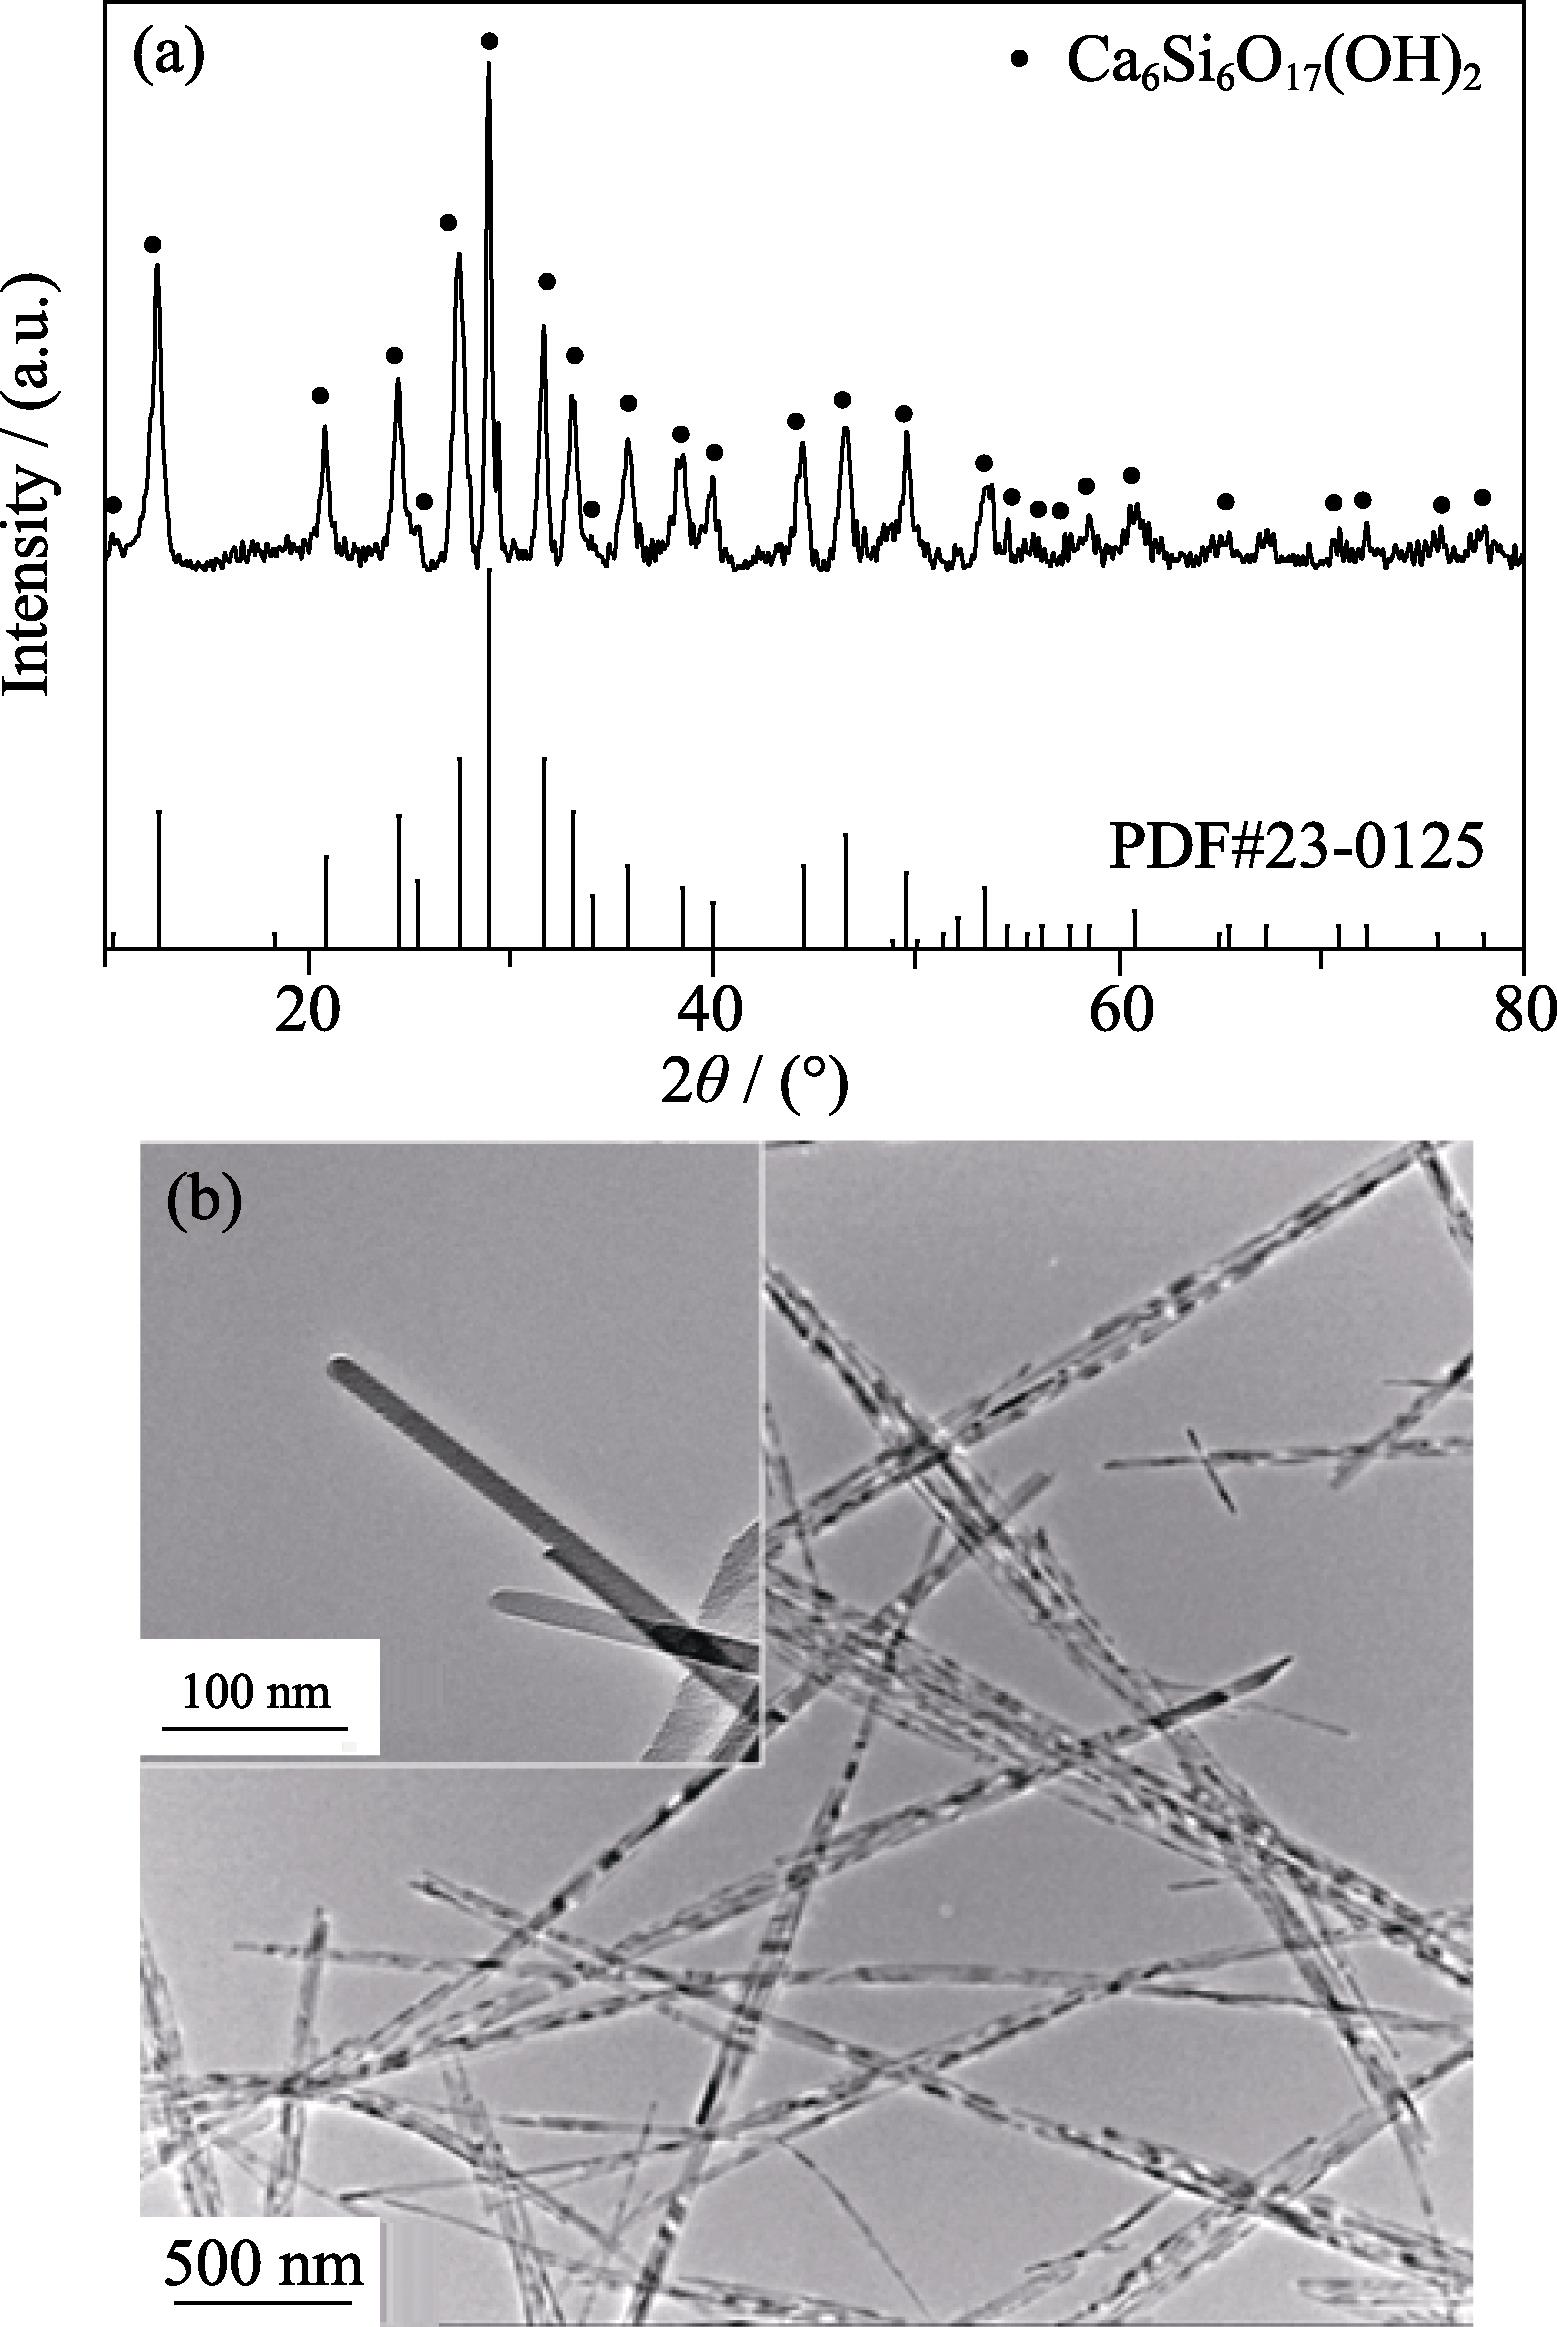 (a) XRD patterns and (b) TEM images of calcium silicate nanowires with inset in (b) showing magnified TEM image of CSH